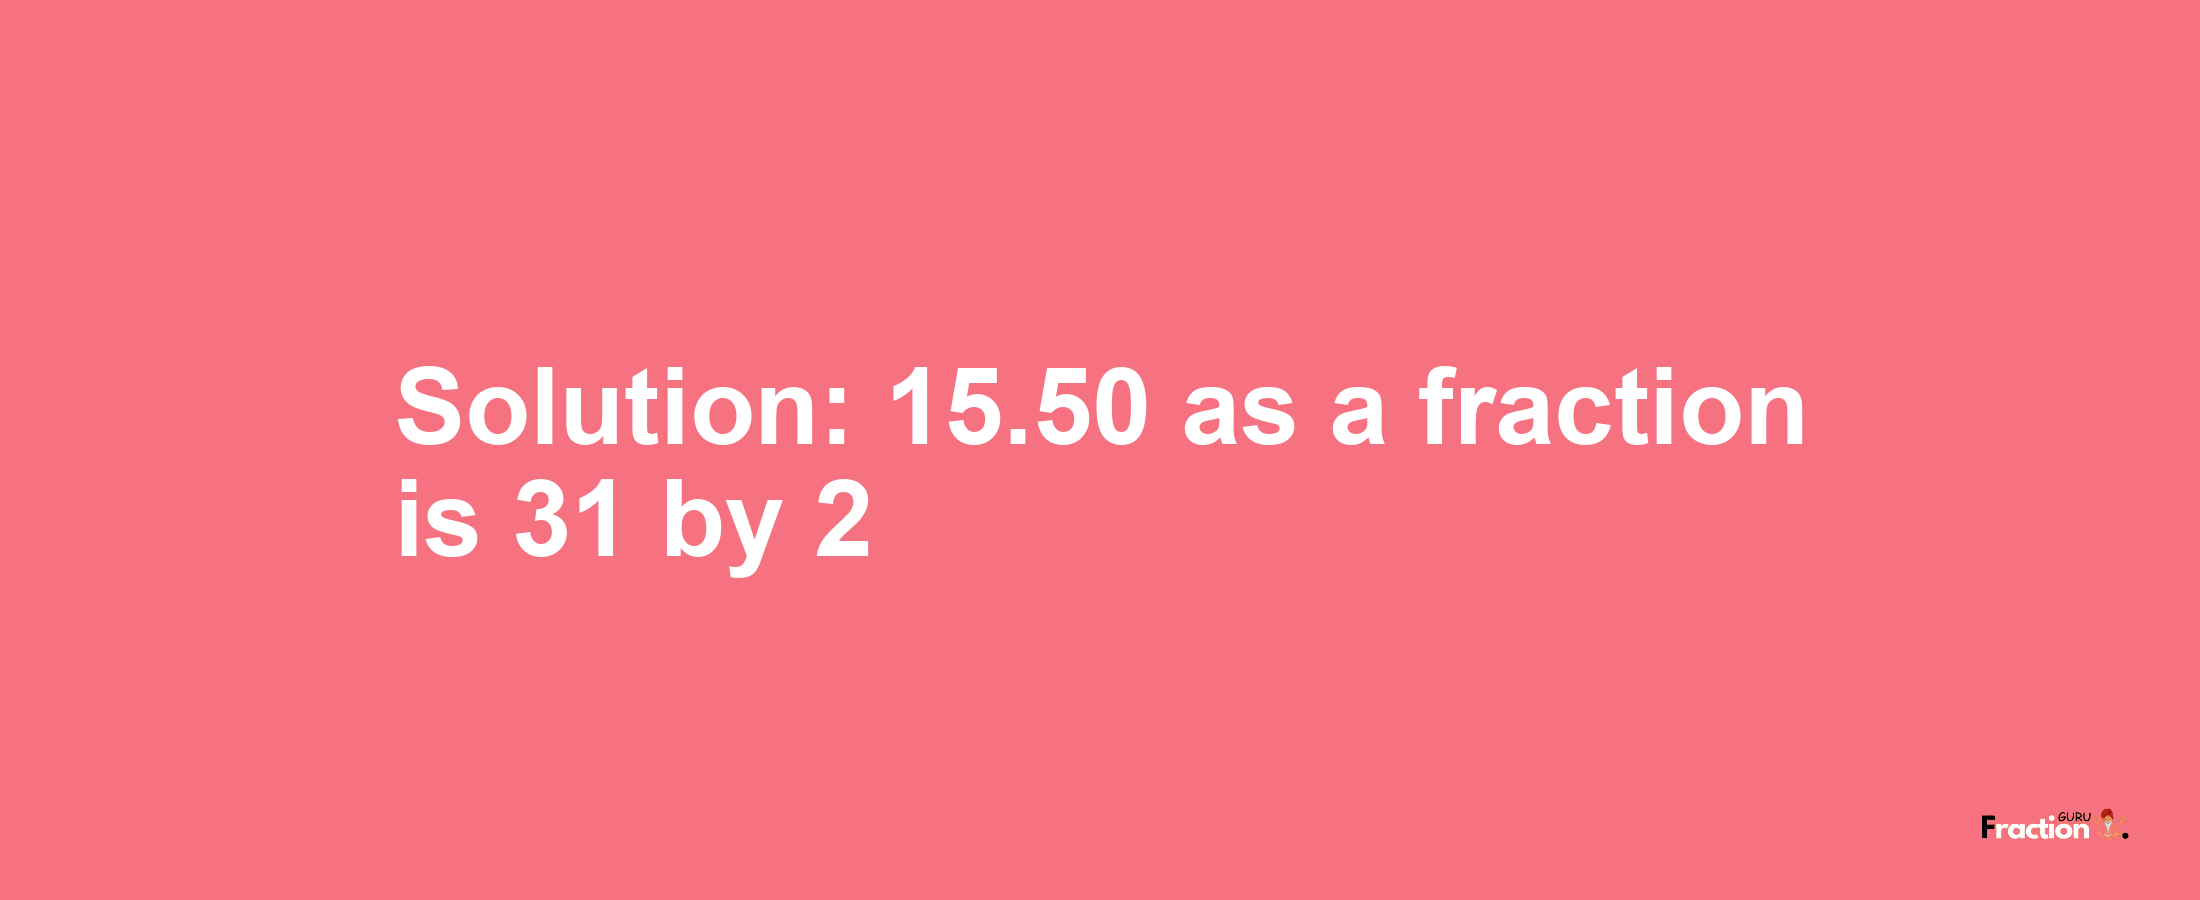 Solution:15.50 as a fraction is 31/2